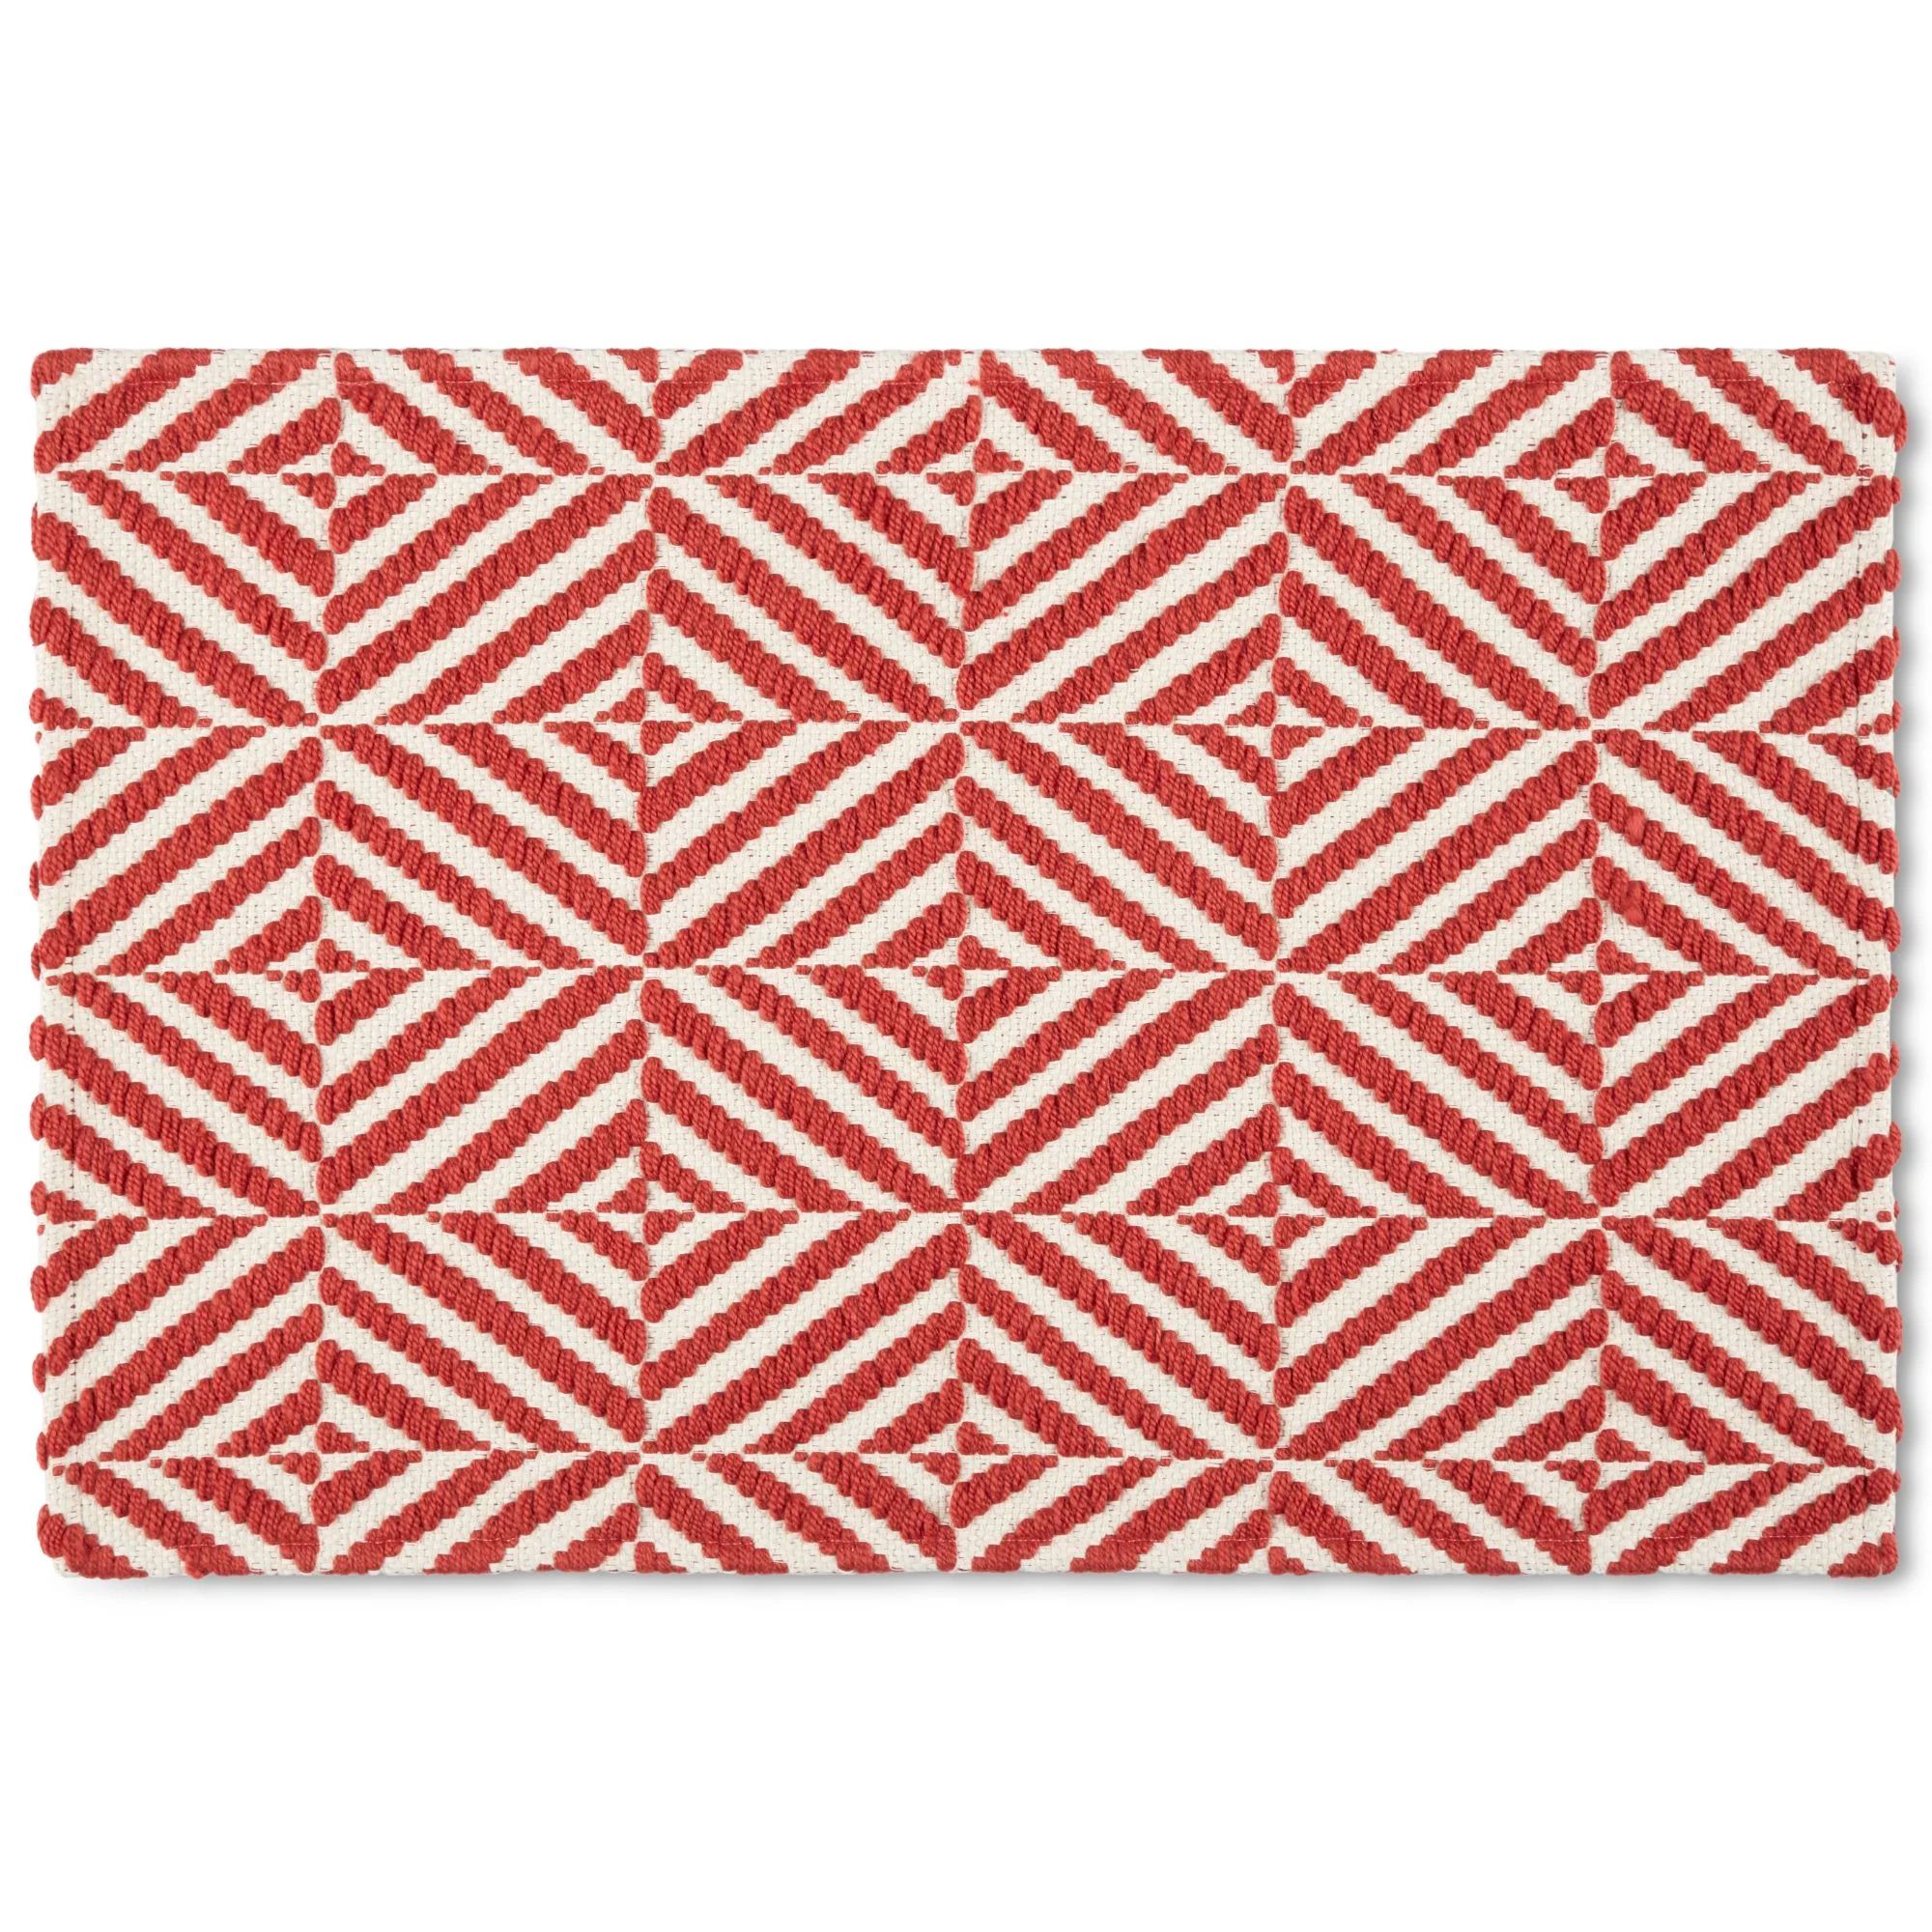 Mainstays Montana Woven Fabric Mat, 18"x27", Red, Available in Multiple Colors | Walmart (US)